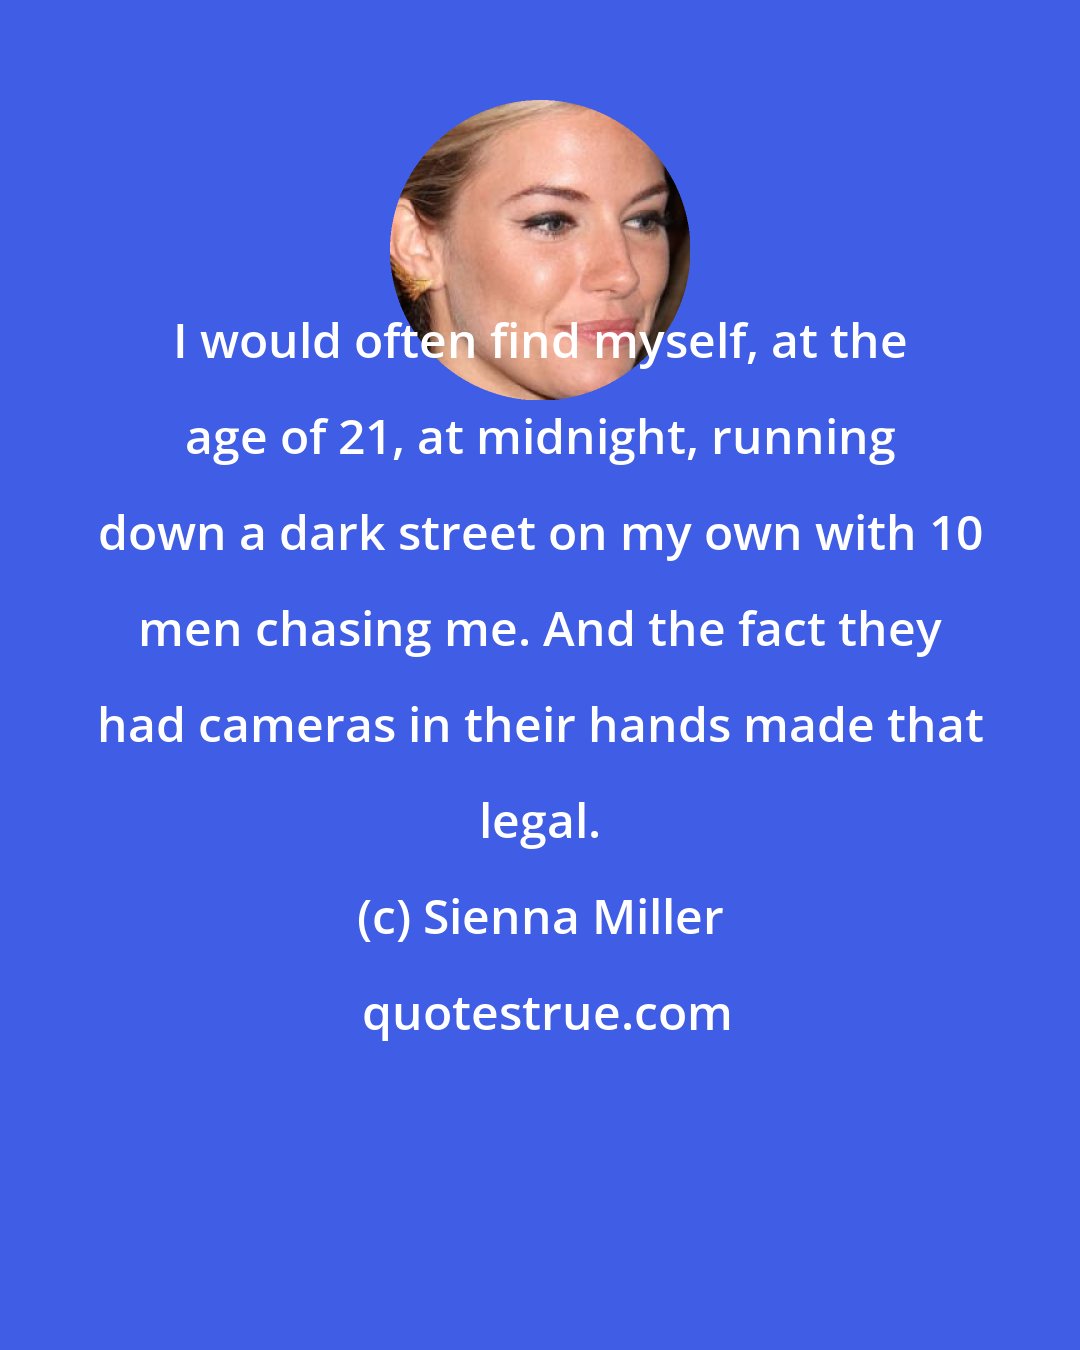 Sienna Miller: I would often find myself, at the age of 21, at midnight, running down a dark street on my own with 10 men chasing me. And the fact they had cameras in their hands made that legal.